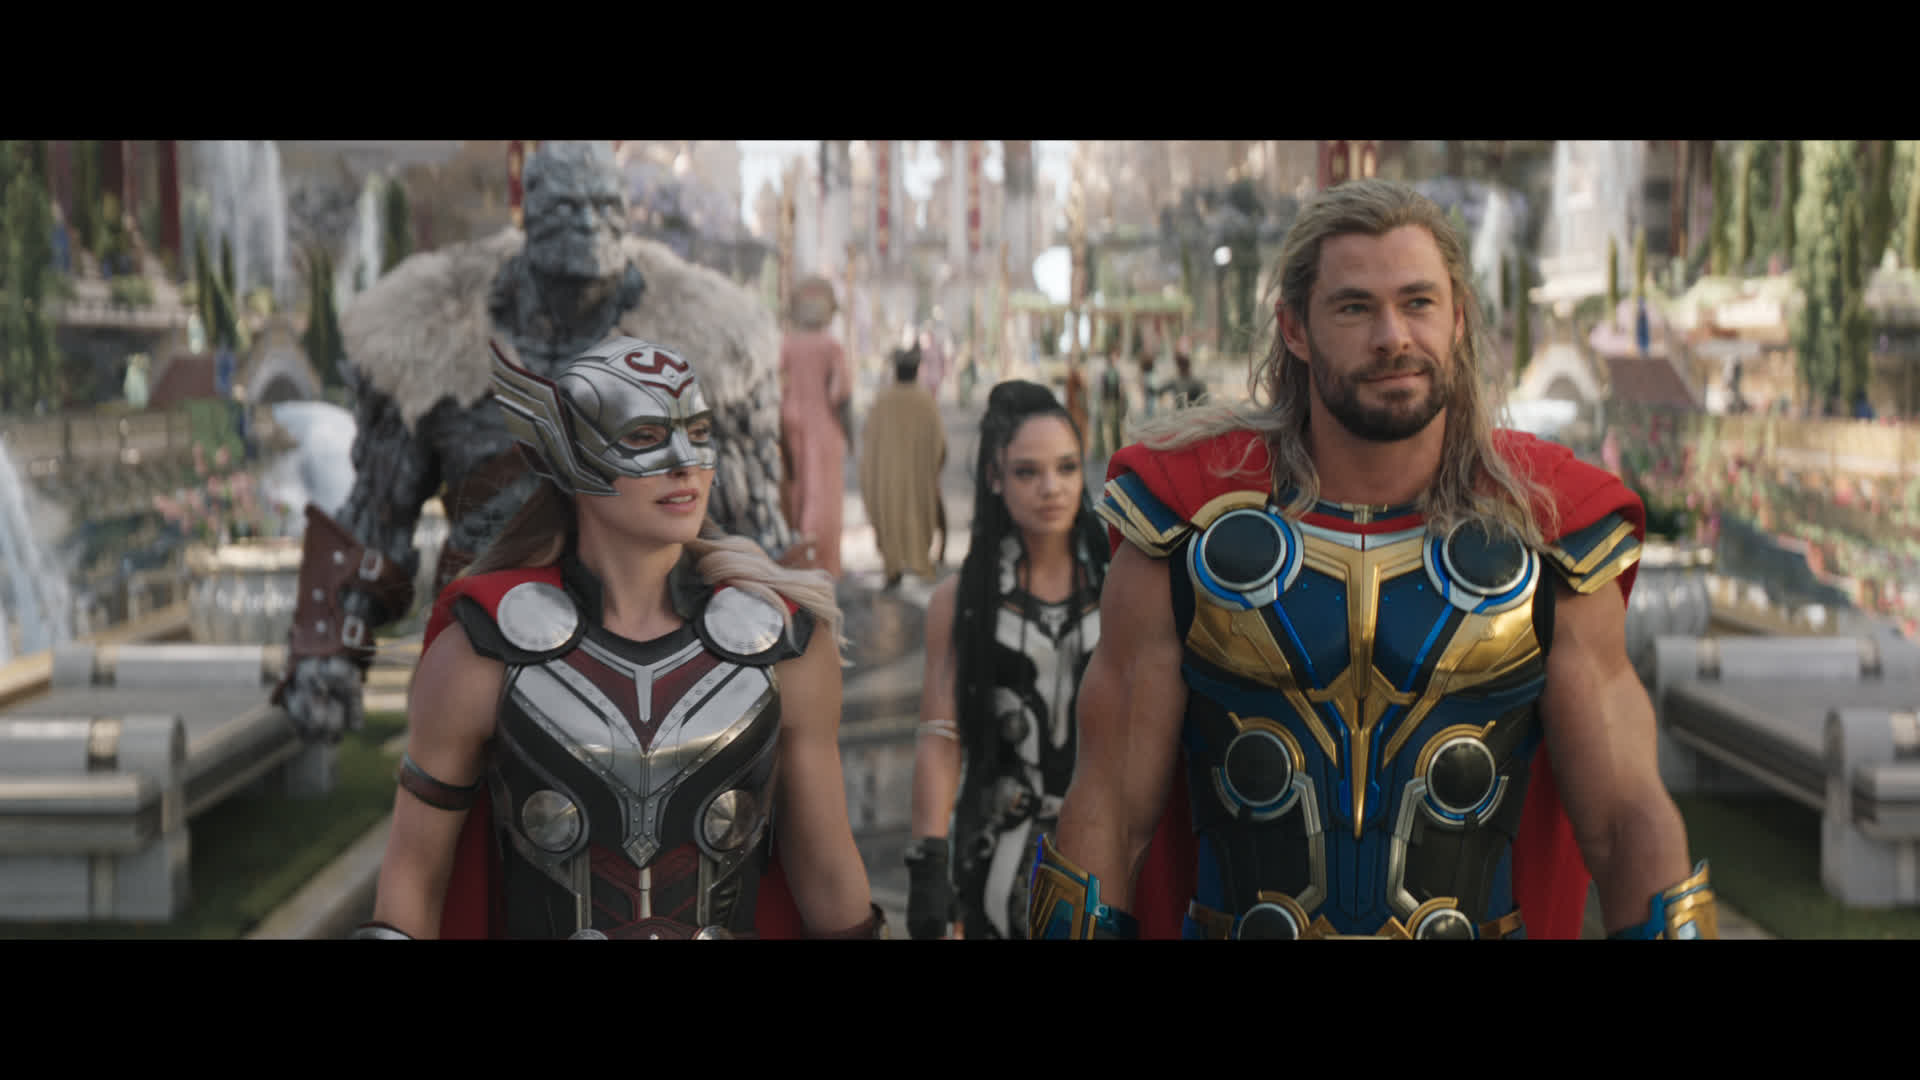 Jane Foster and Thor walk next to each other, followed by companions